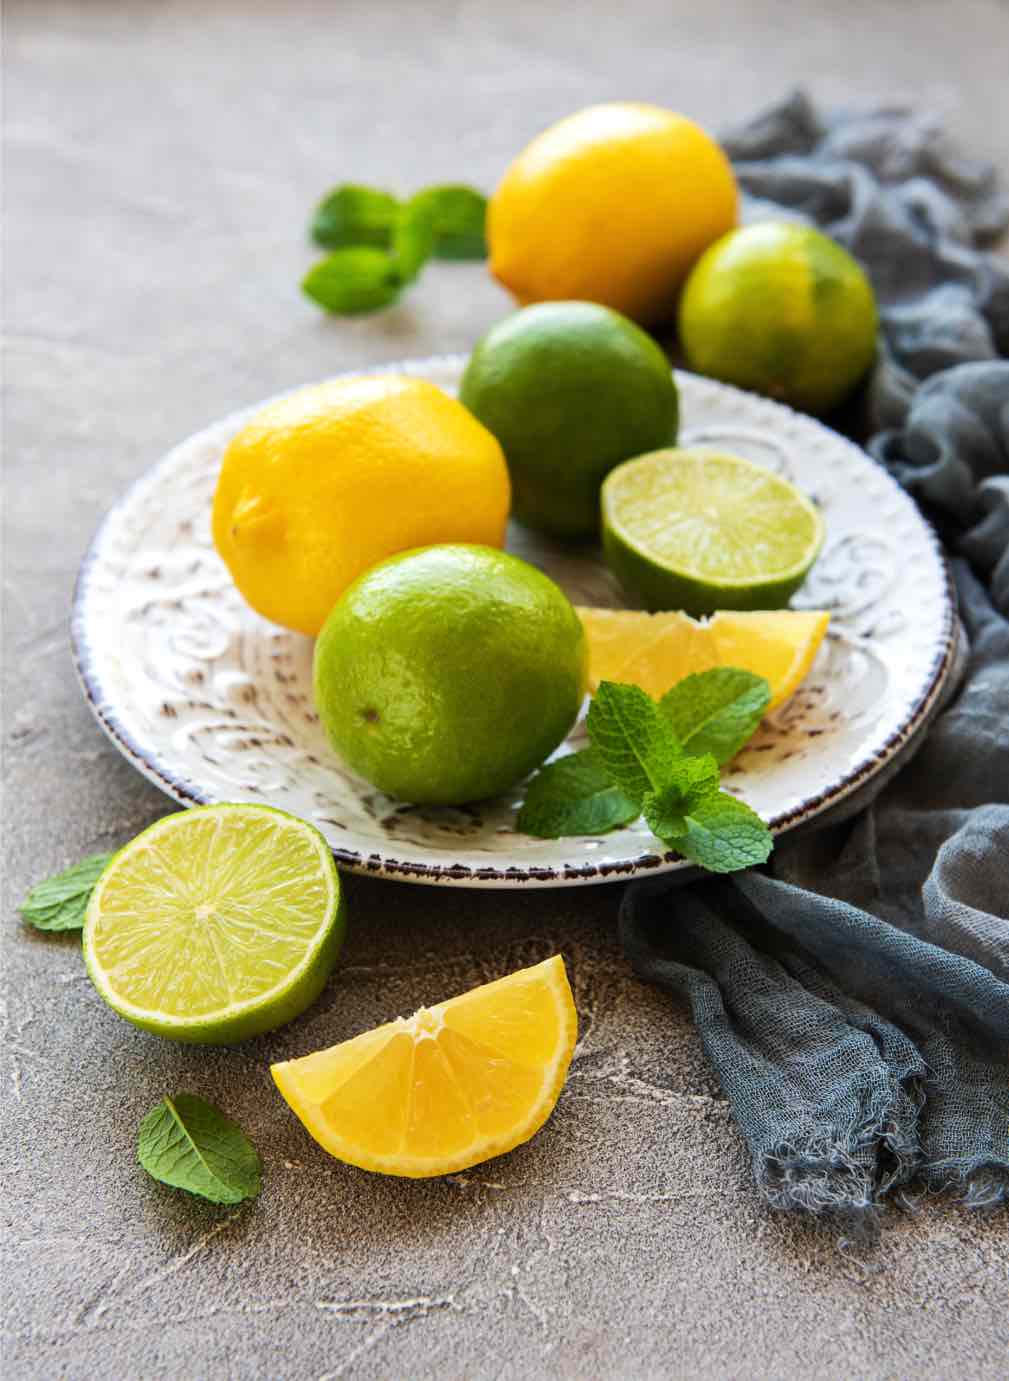 Lemons and limes are great for humans, but not for dogs - learn more with Dog Training Elite Southeast Louisiana in Baton Rouge!